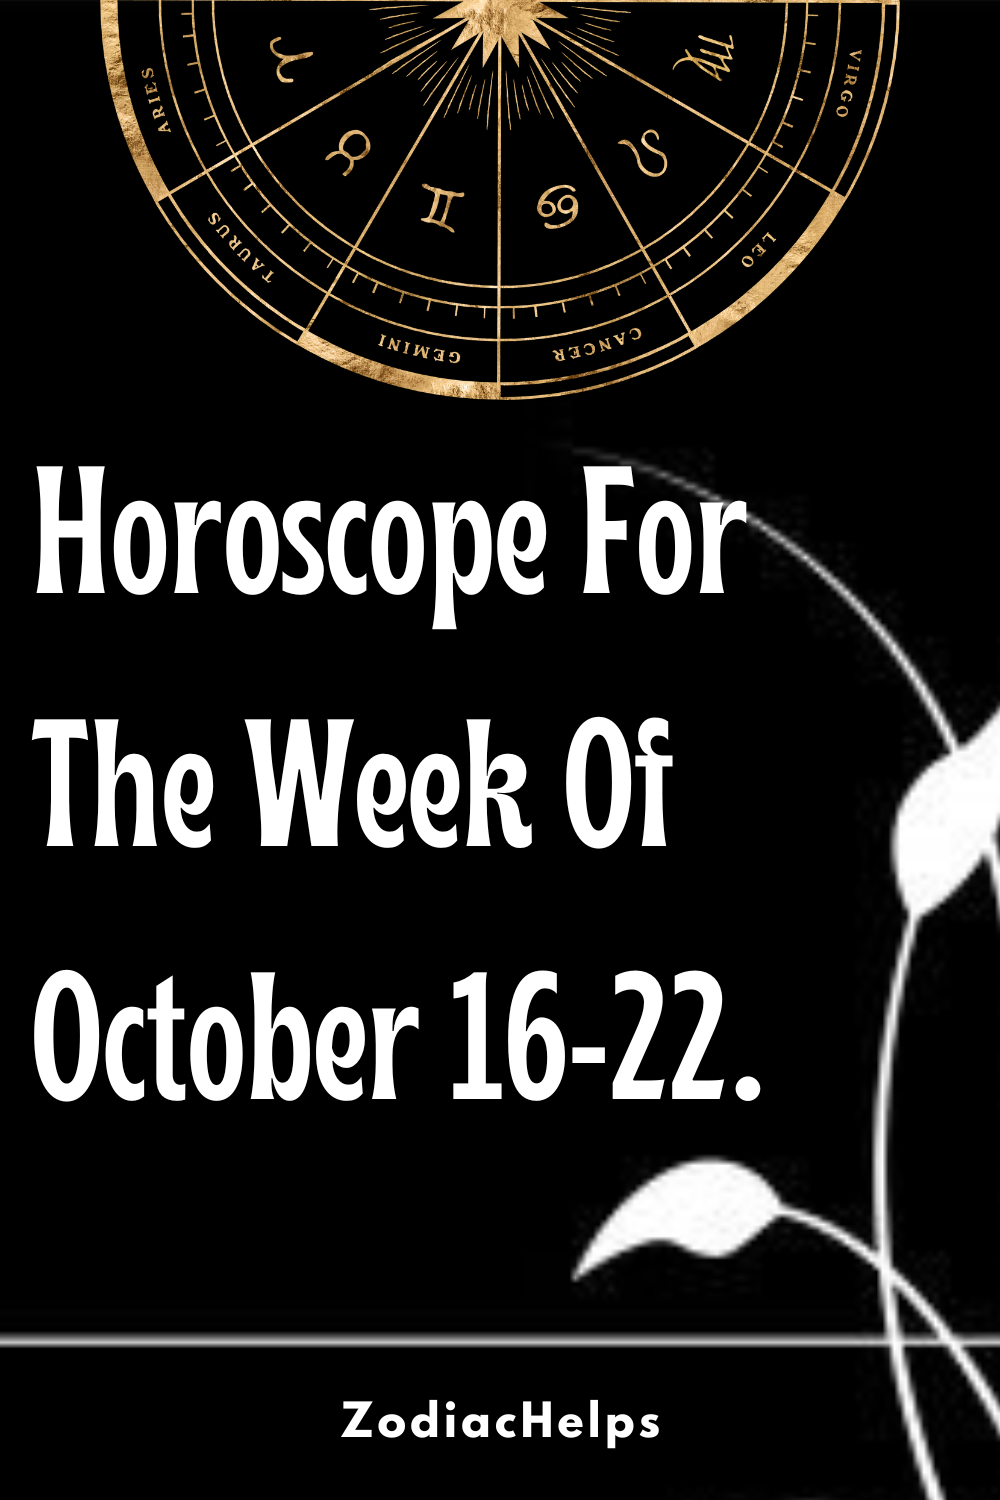 Horoscope For The Week Of October 16-22.